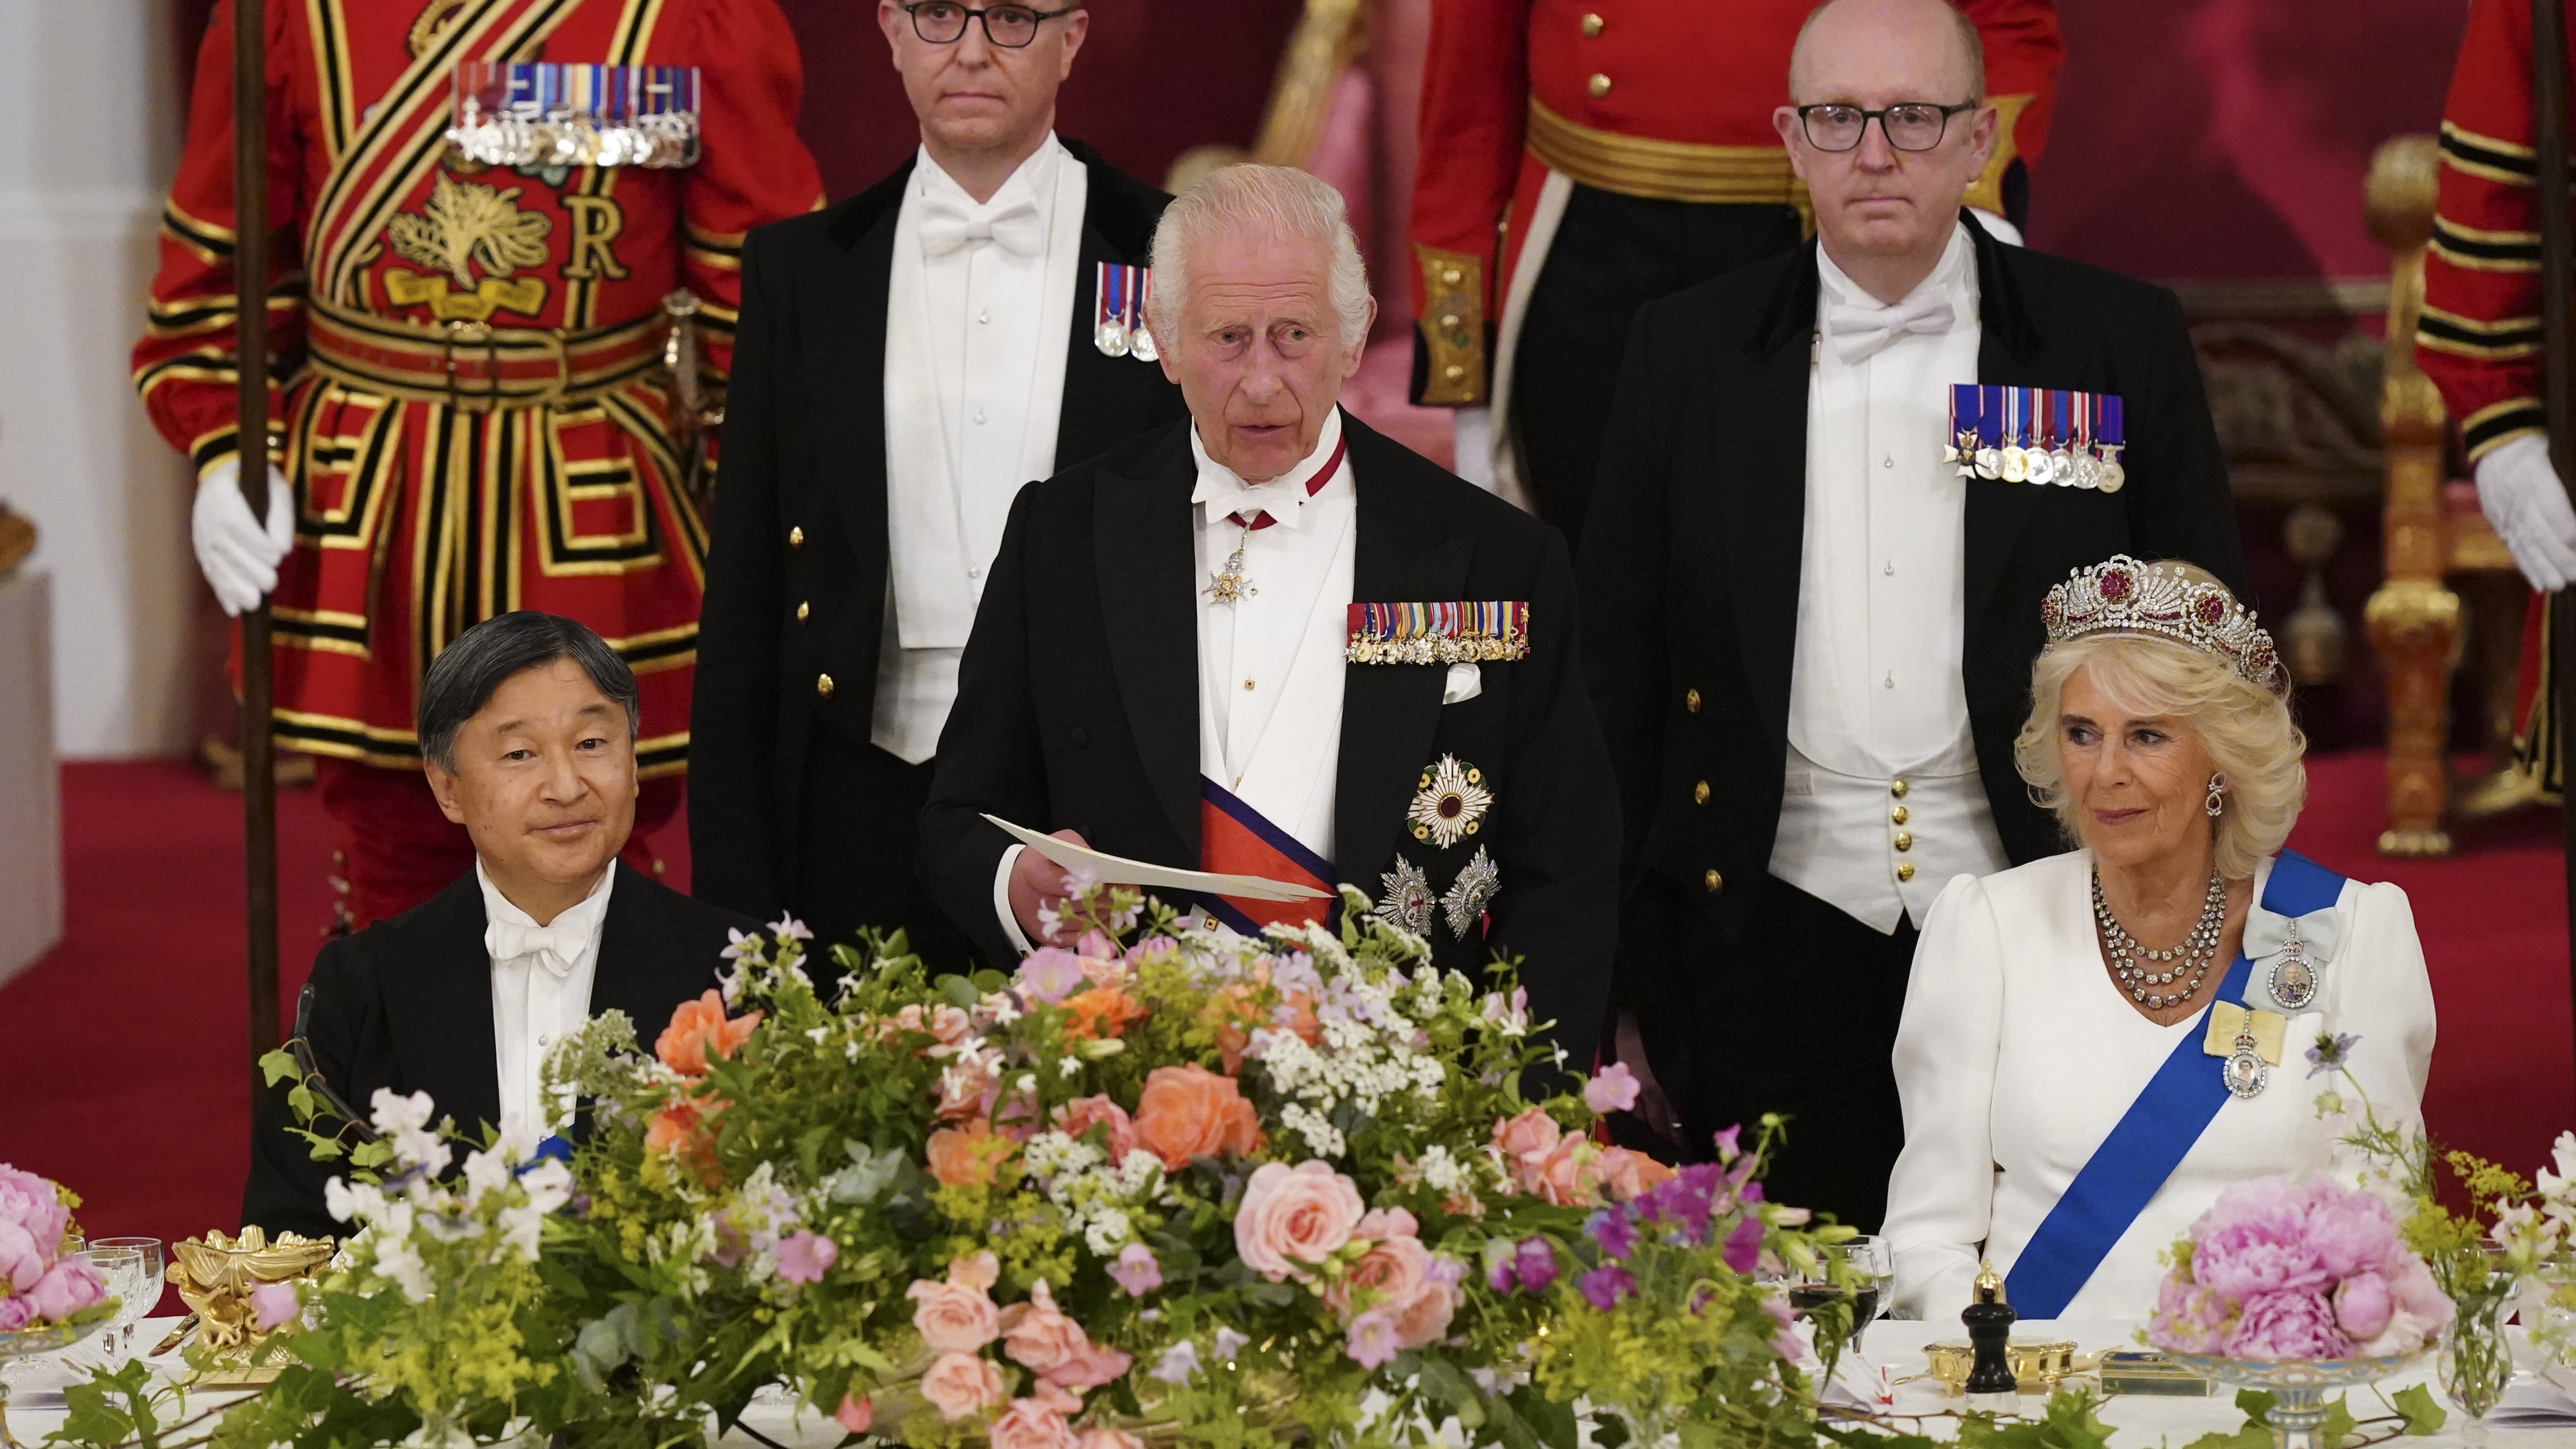 The King hosted a state visit in June – an unprecedented move in the run up to a General Election